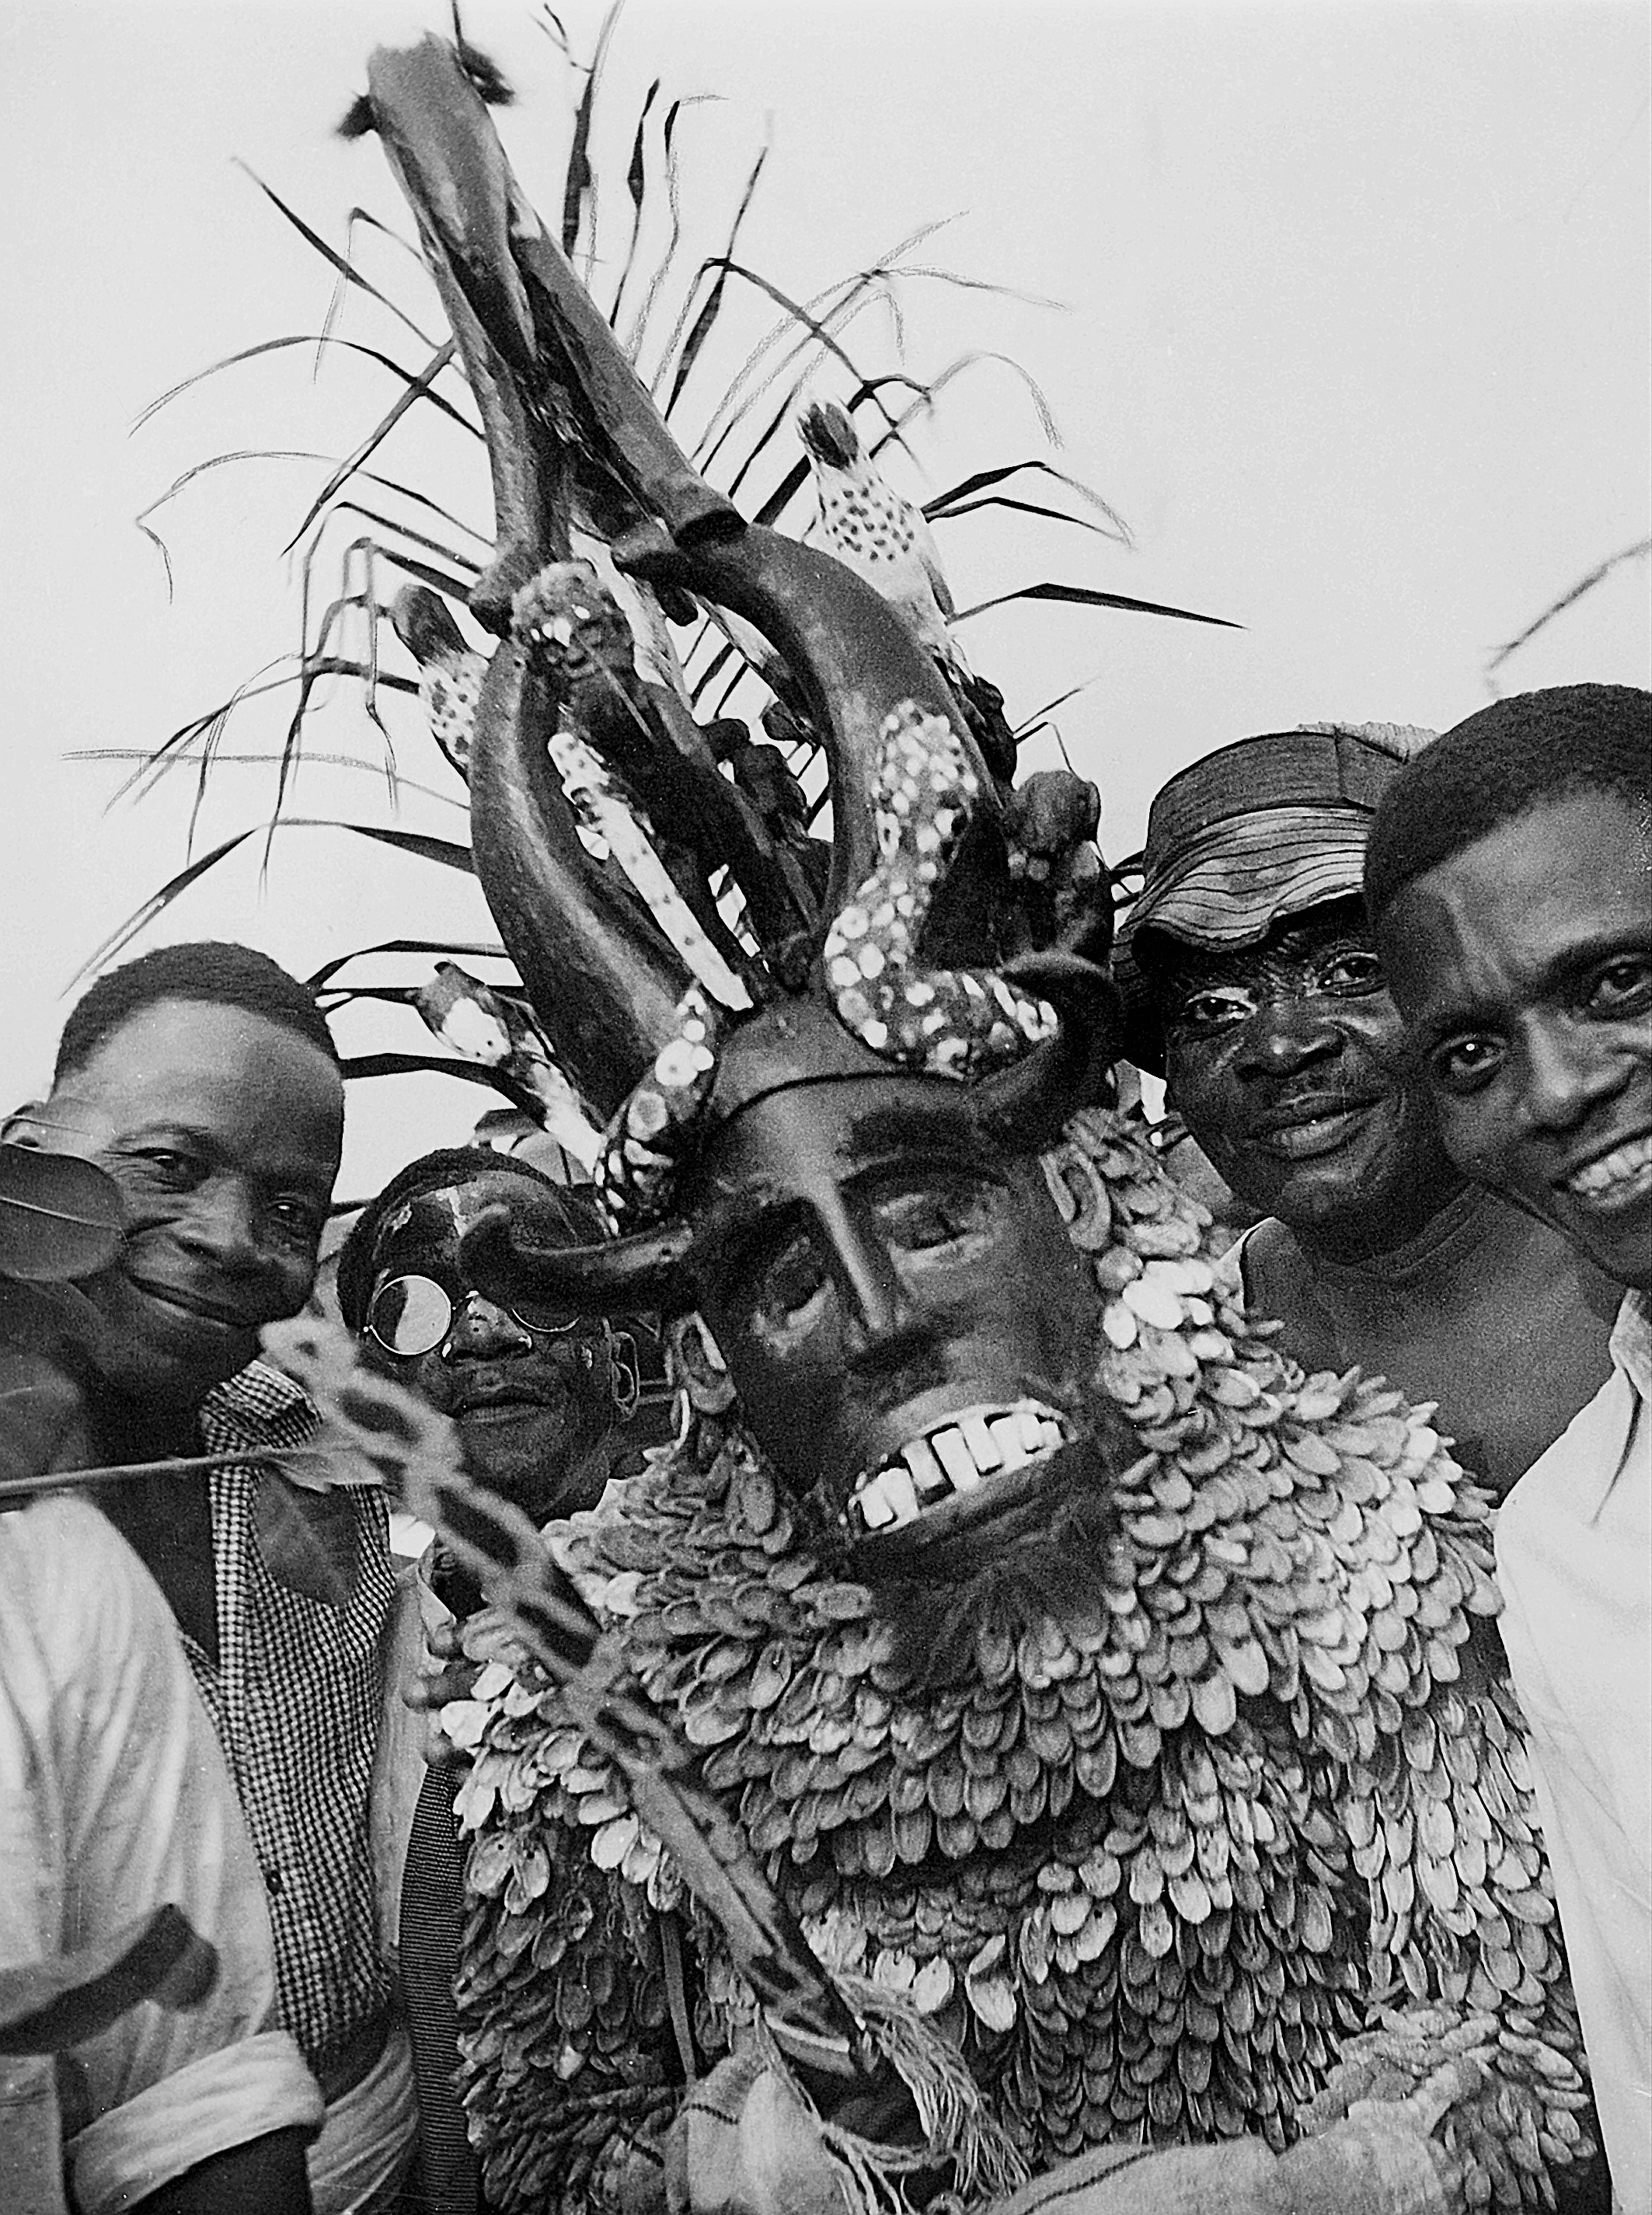 Close up image of a person in a masquerade outfit surrounded by a group of people